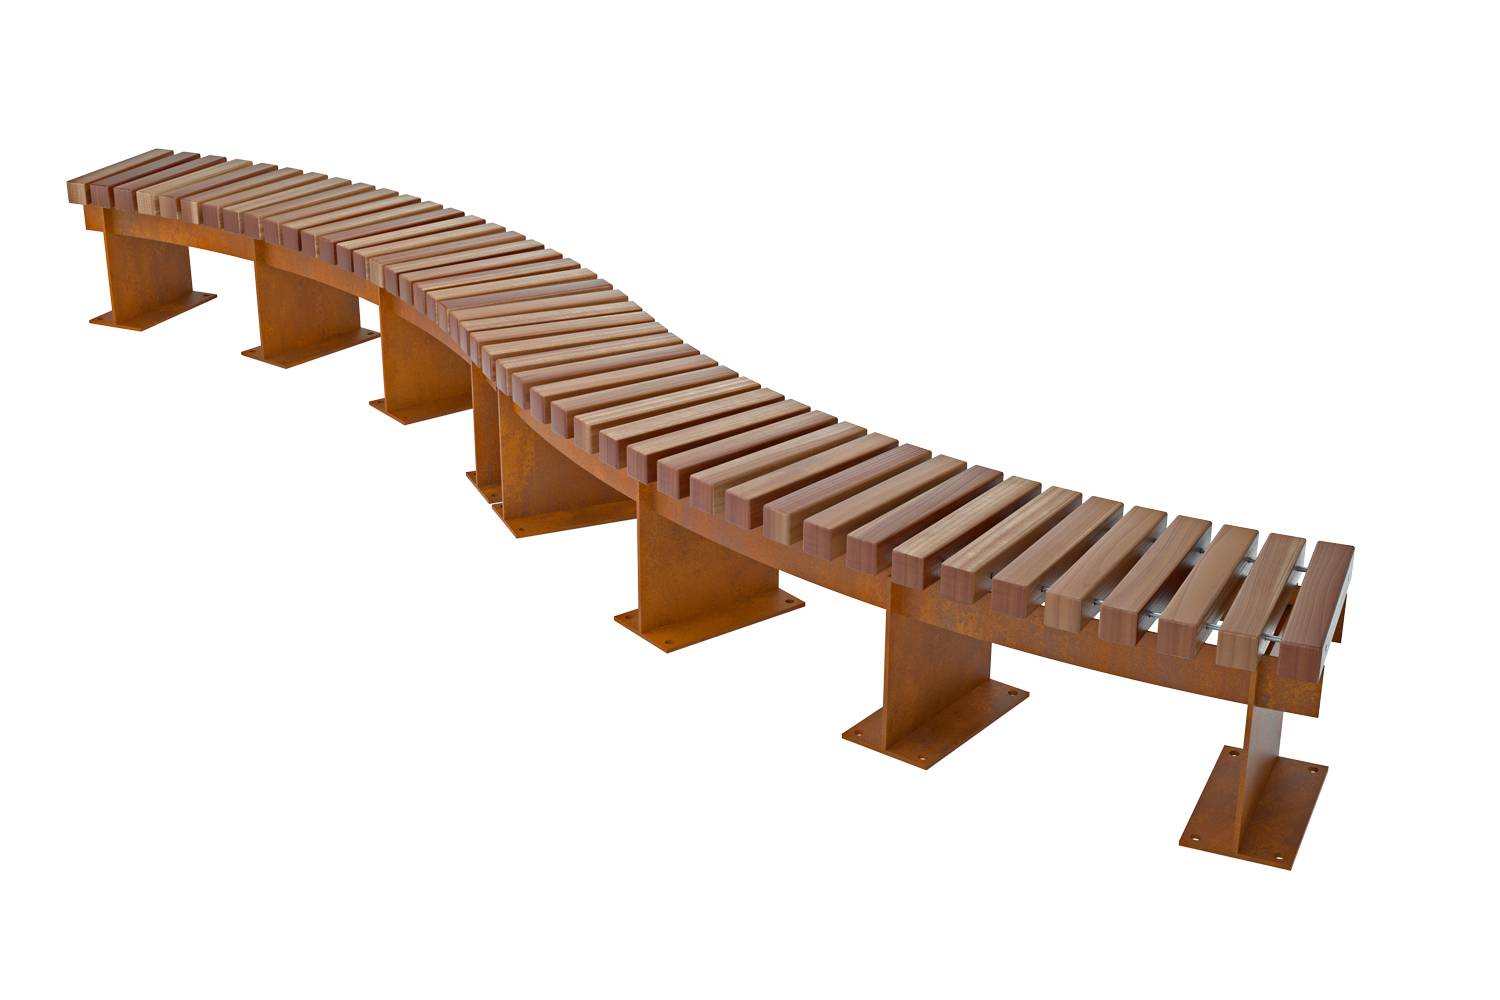 Integrated Timber Benches - Timber bench systems